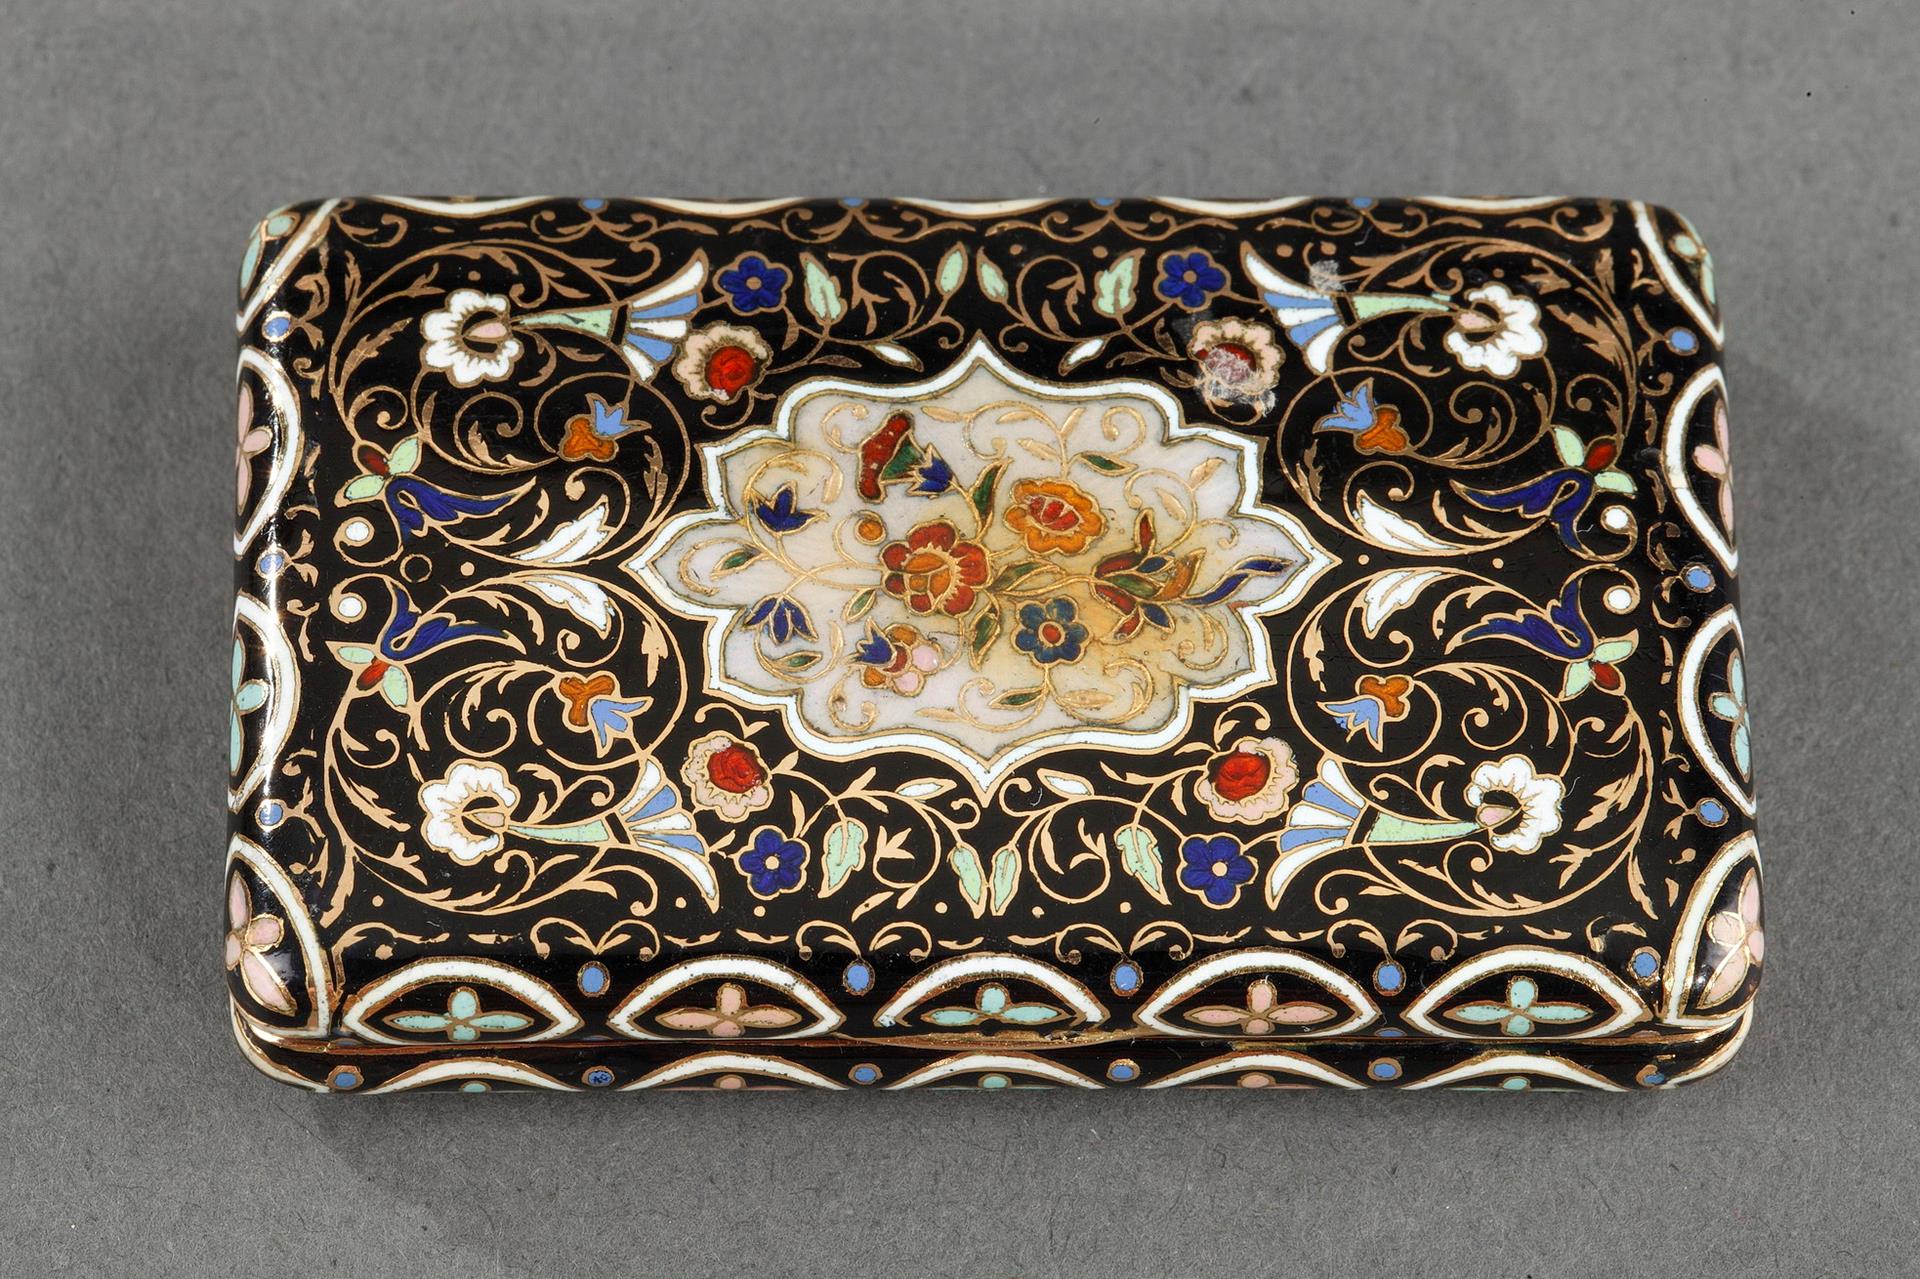 Mid-19th century Gold and enamel snuffbox. 